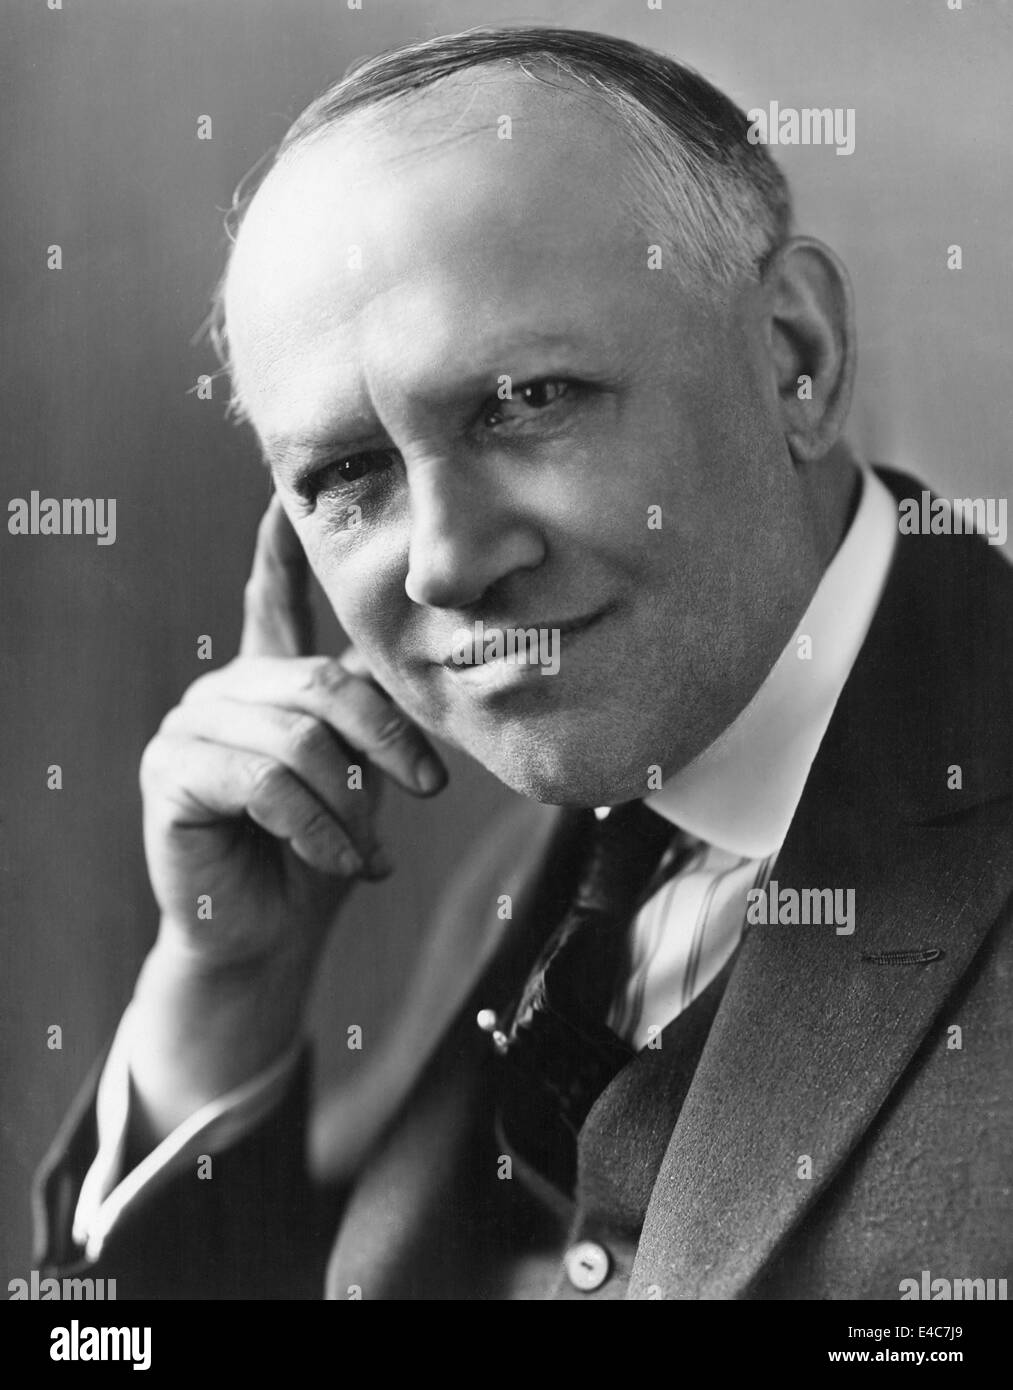 Carl Laemmle, Pioneer in American Film Making and Founder of Universal Studios, Portrait, circa 1910's Stock Photo